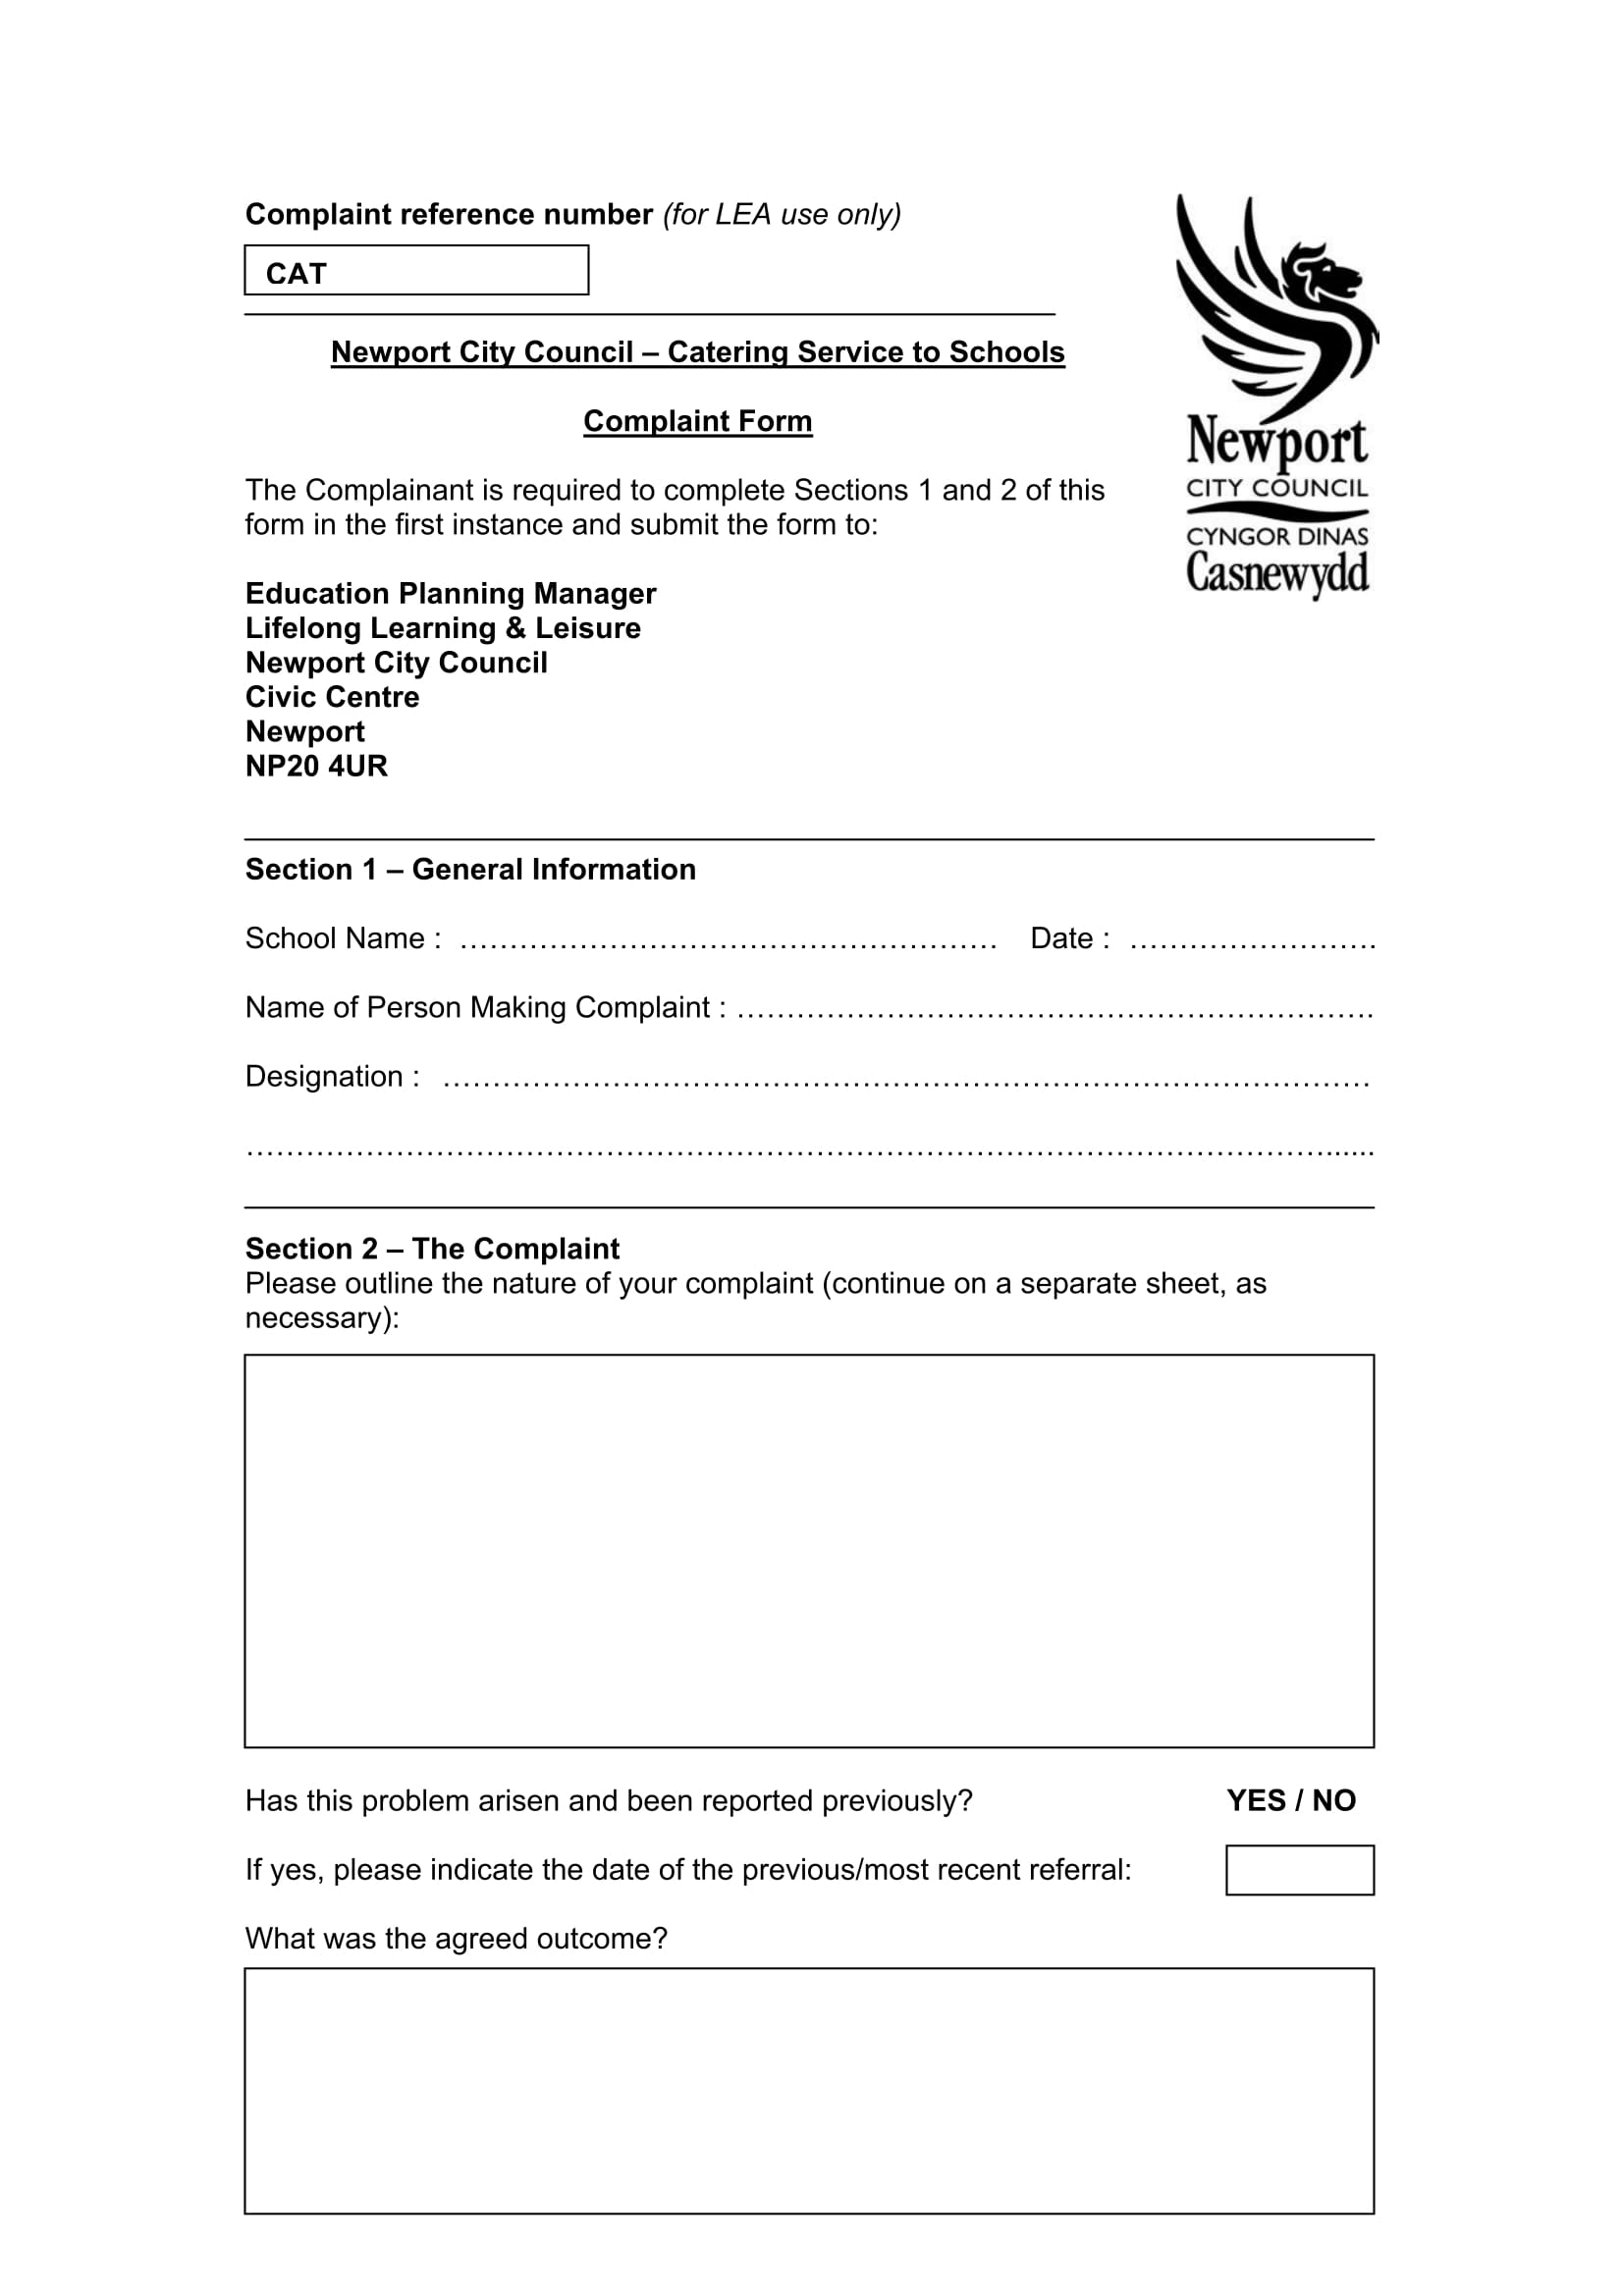 catering service complaint form 1